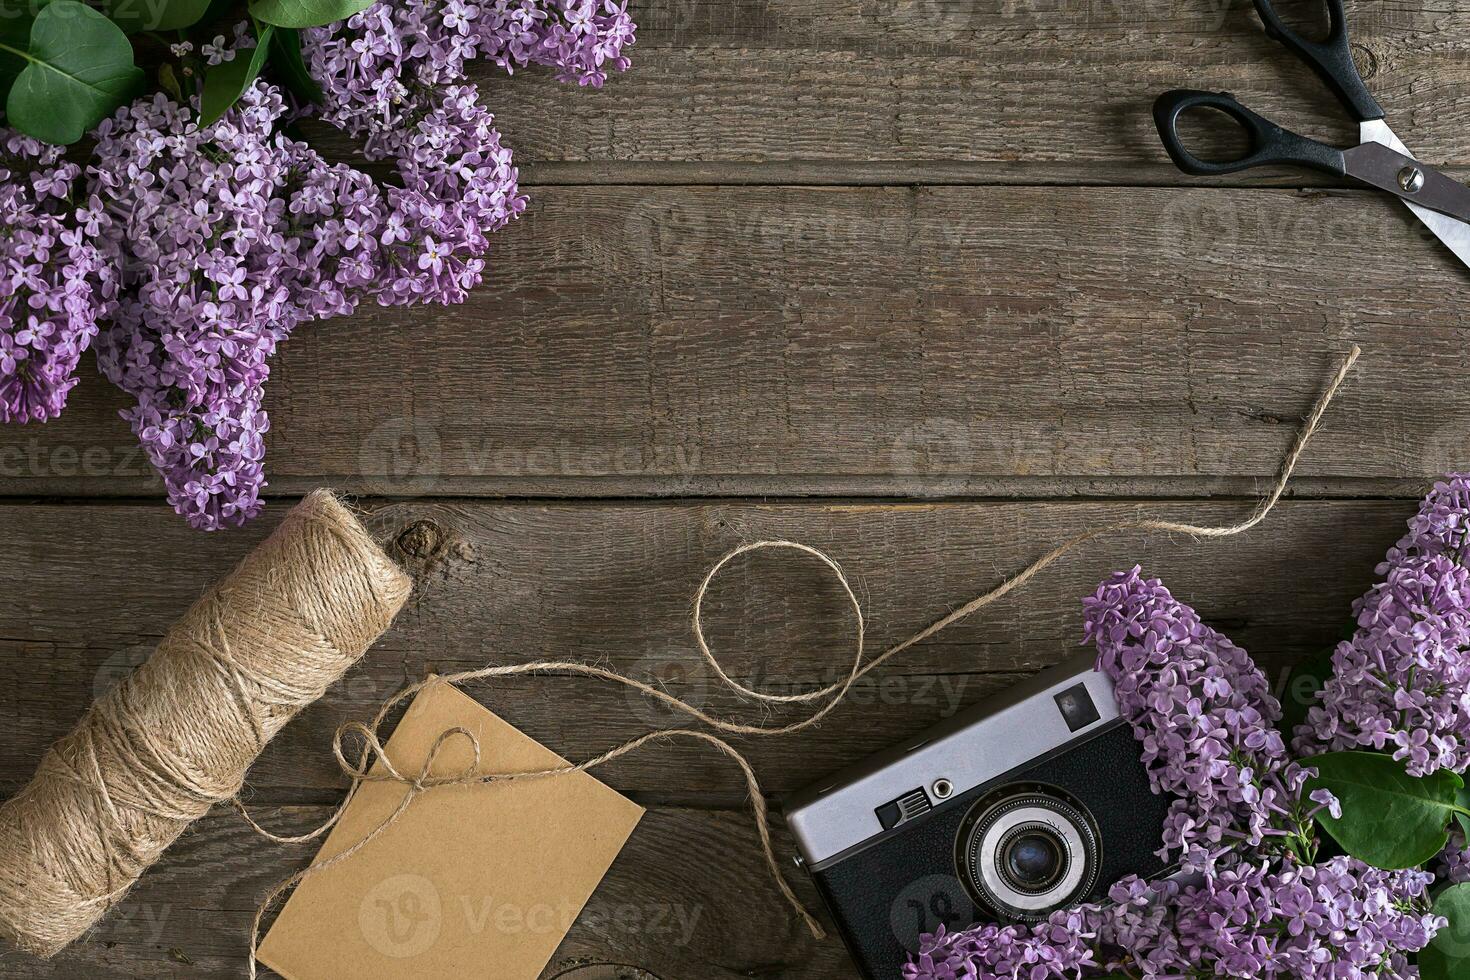 Lilac blossom on rustic wooden background with empty space for greeting message. Scissors, thread reel, small envelope and camera. Top view photo